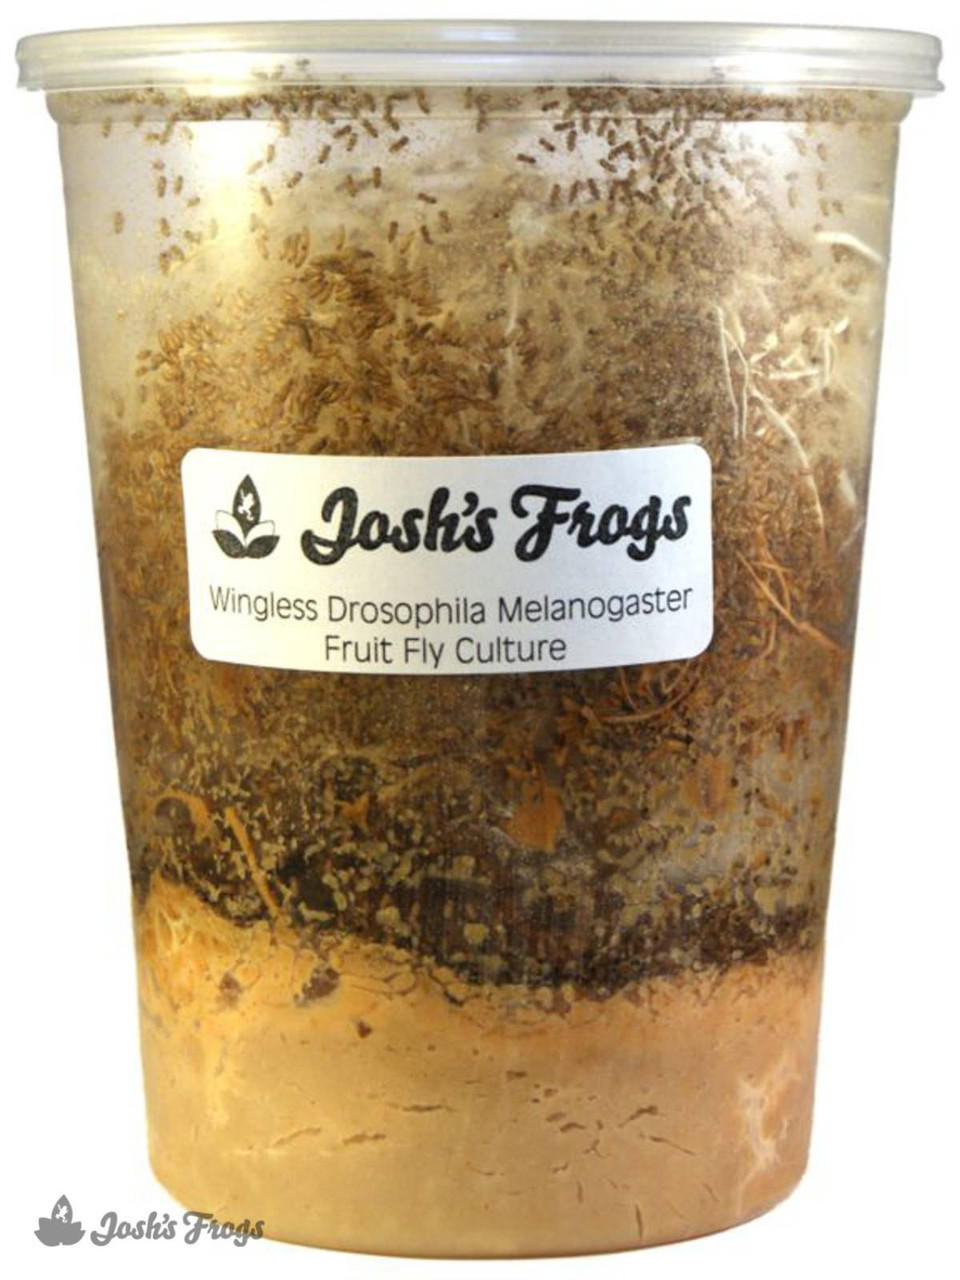 All Things Reptile® Josh's Frogs Melanogaster Fruit Fly Media | 1.5 lbs / 1.35 Quarts (makes 10 fruit fly cultures) 